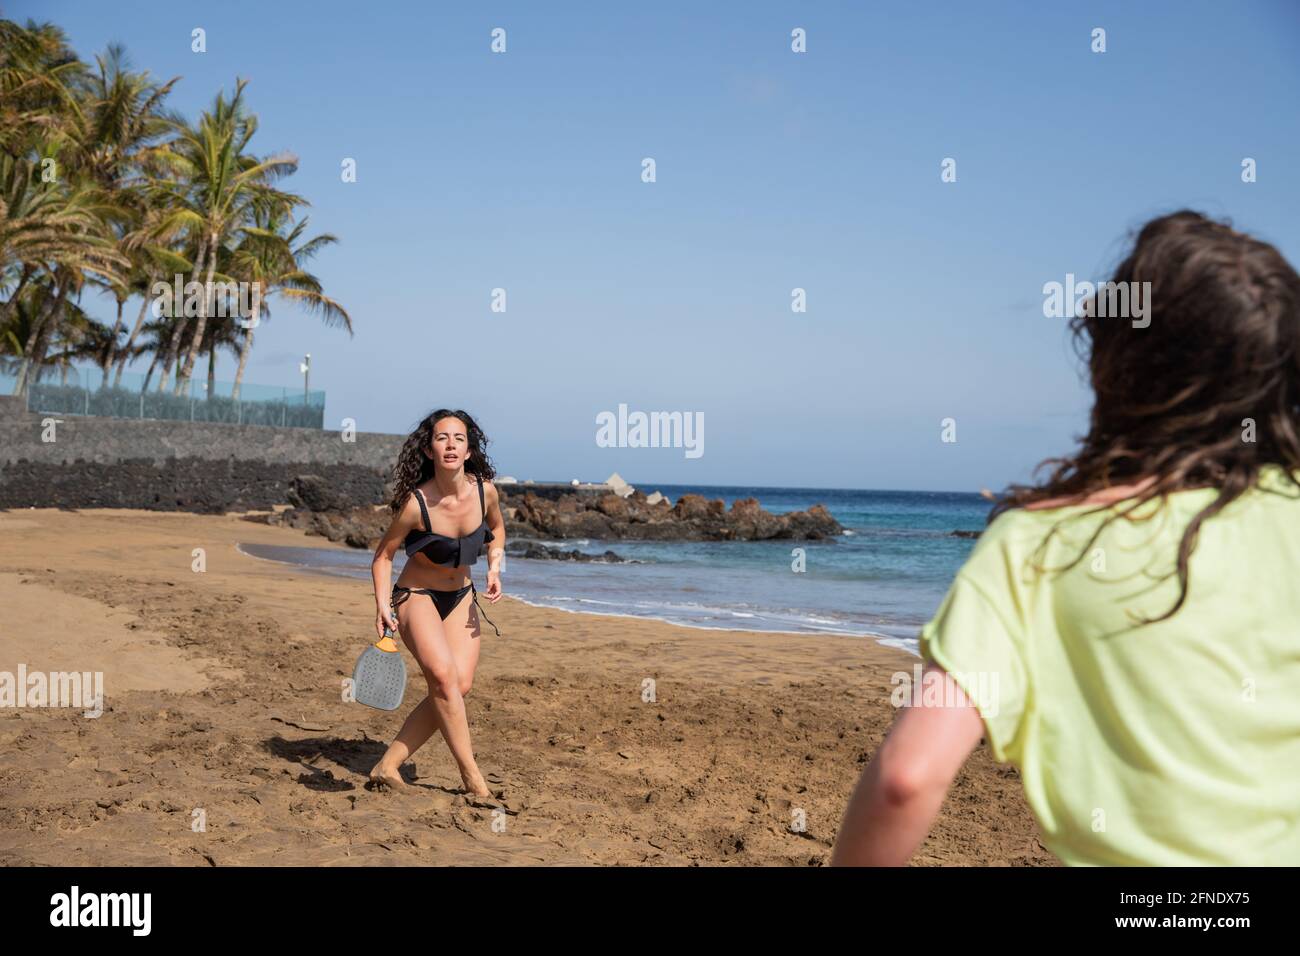 close-up of a girl playing beach tennis with her friend during their vacation in an exotic location Stock Photo